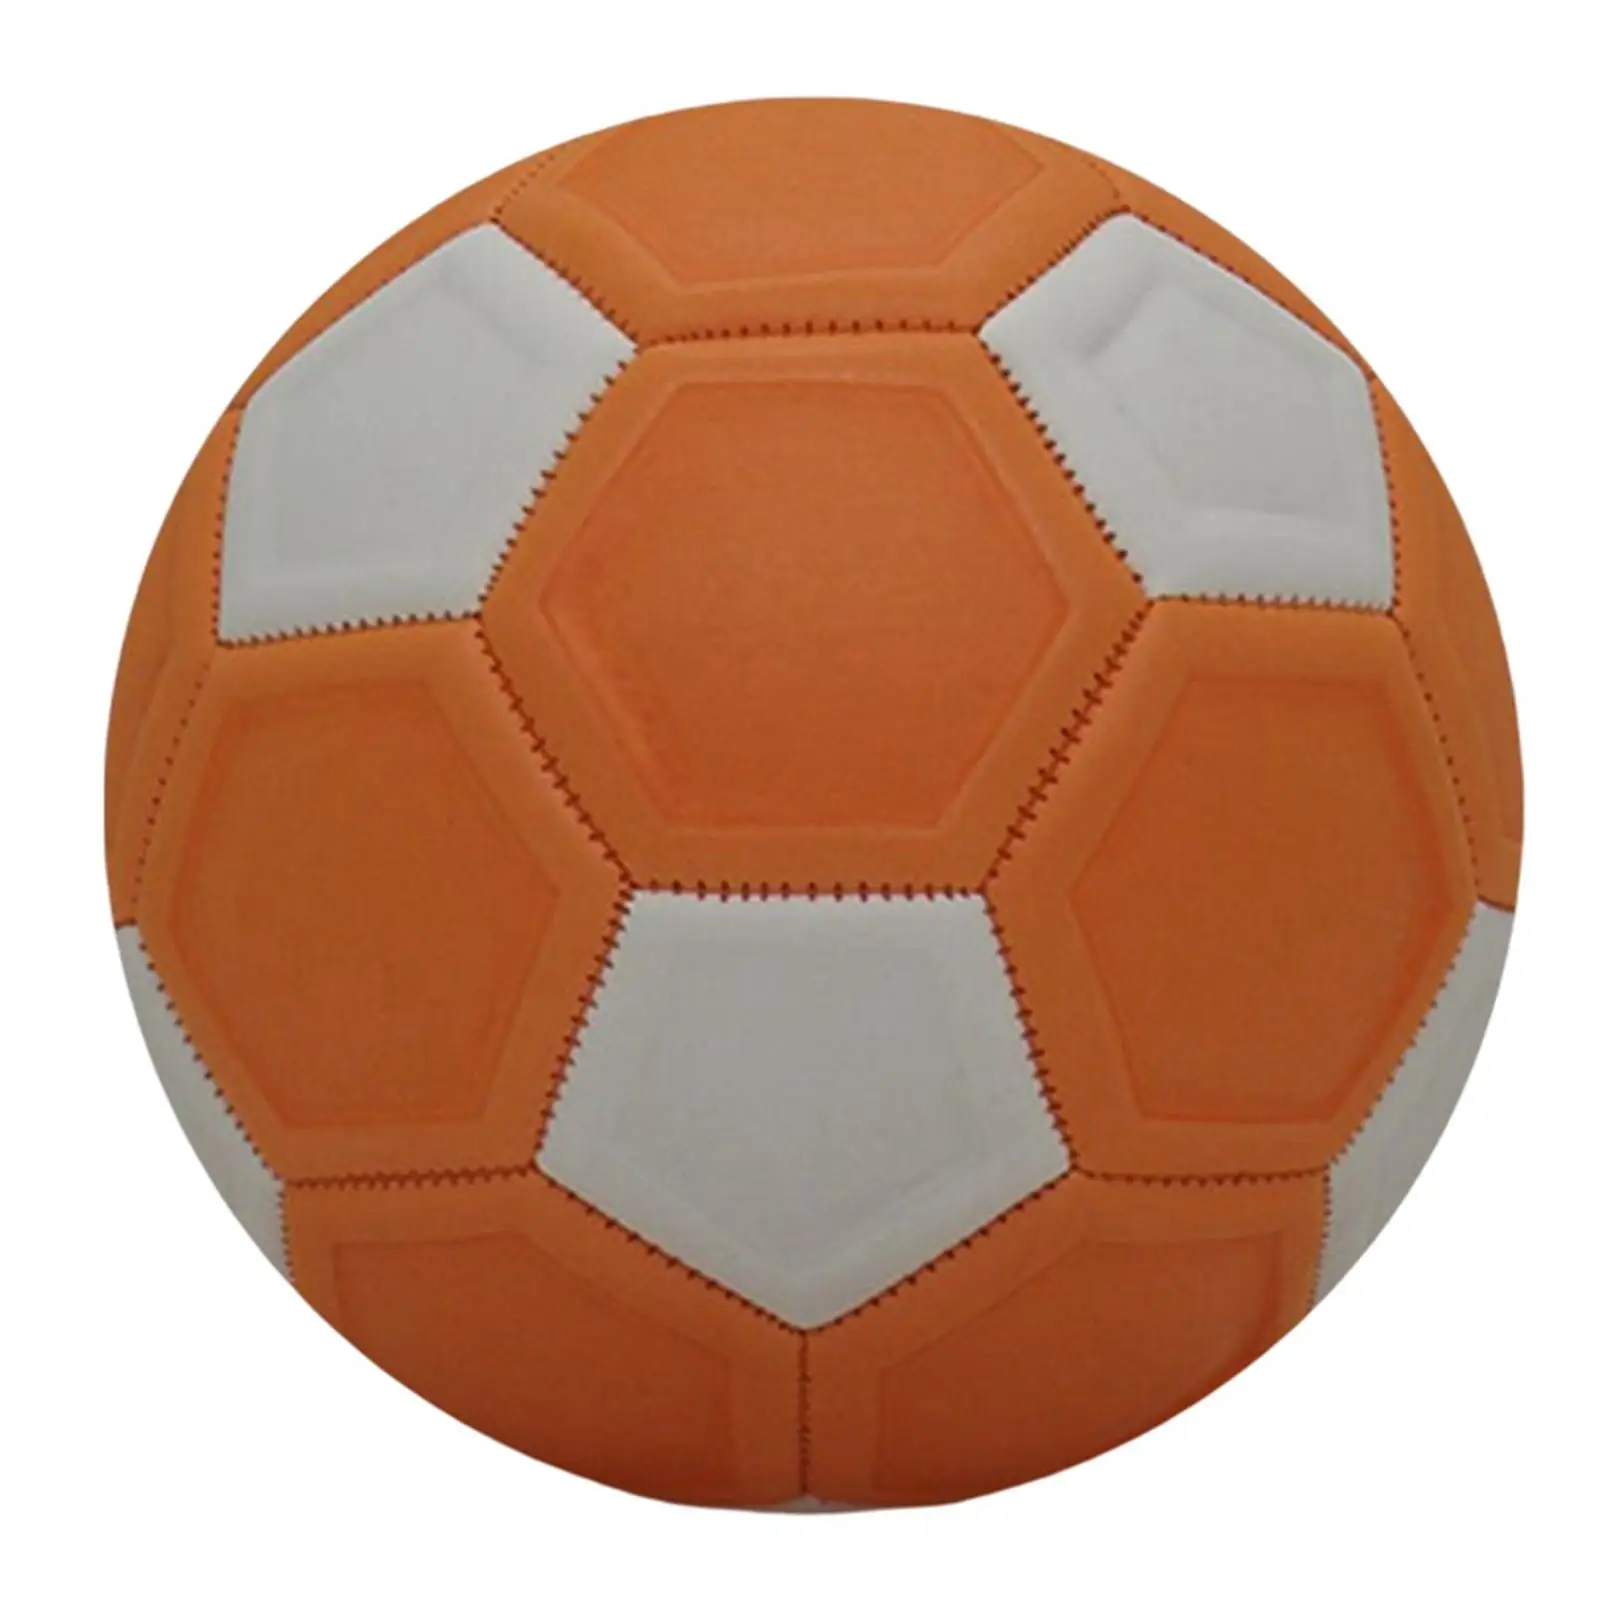 Soccer Bll Size 4 Birthdy Gift Sports Bll Trining Futsl Plytime for Youth Kids Toddlers Girls Boys Teens Indoor Outdoor